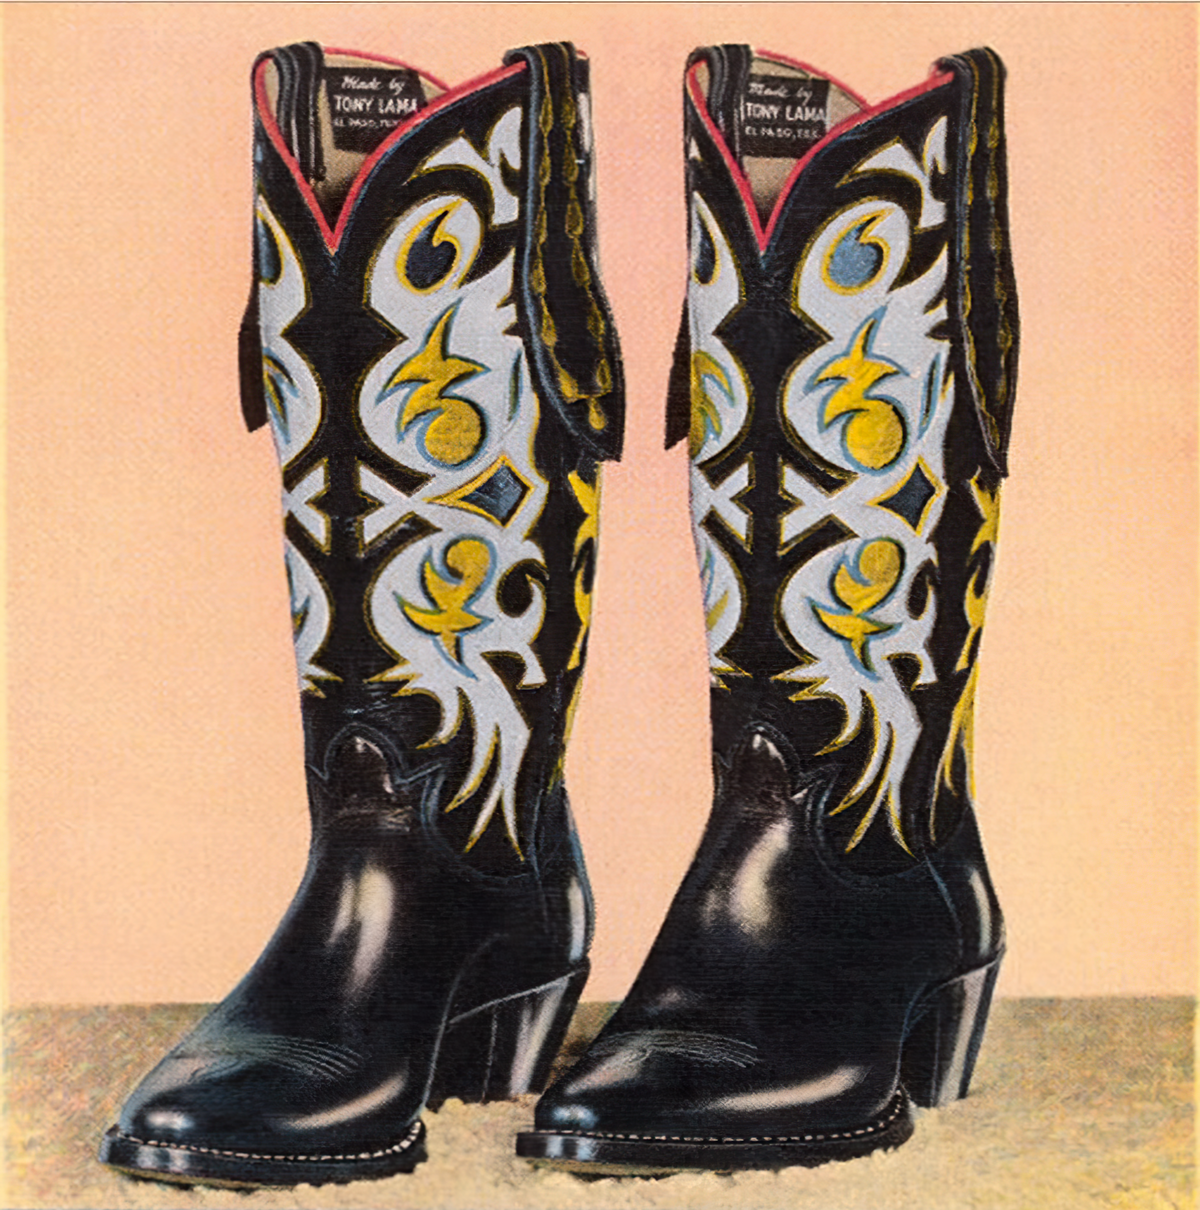 https://upload.wikimedia.org/wikipedia/commons/thumb/f/f1/Cowboy_boots_cropped.png/1200px-Cowboy_boots_cropped.png